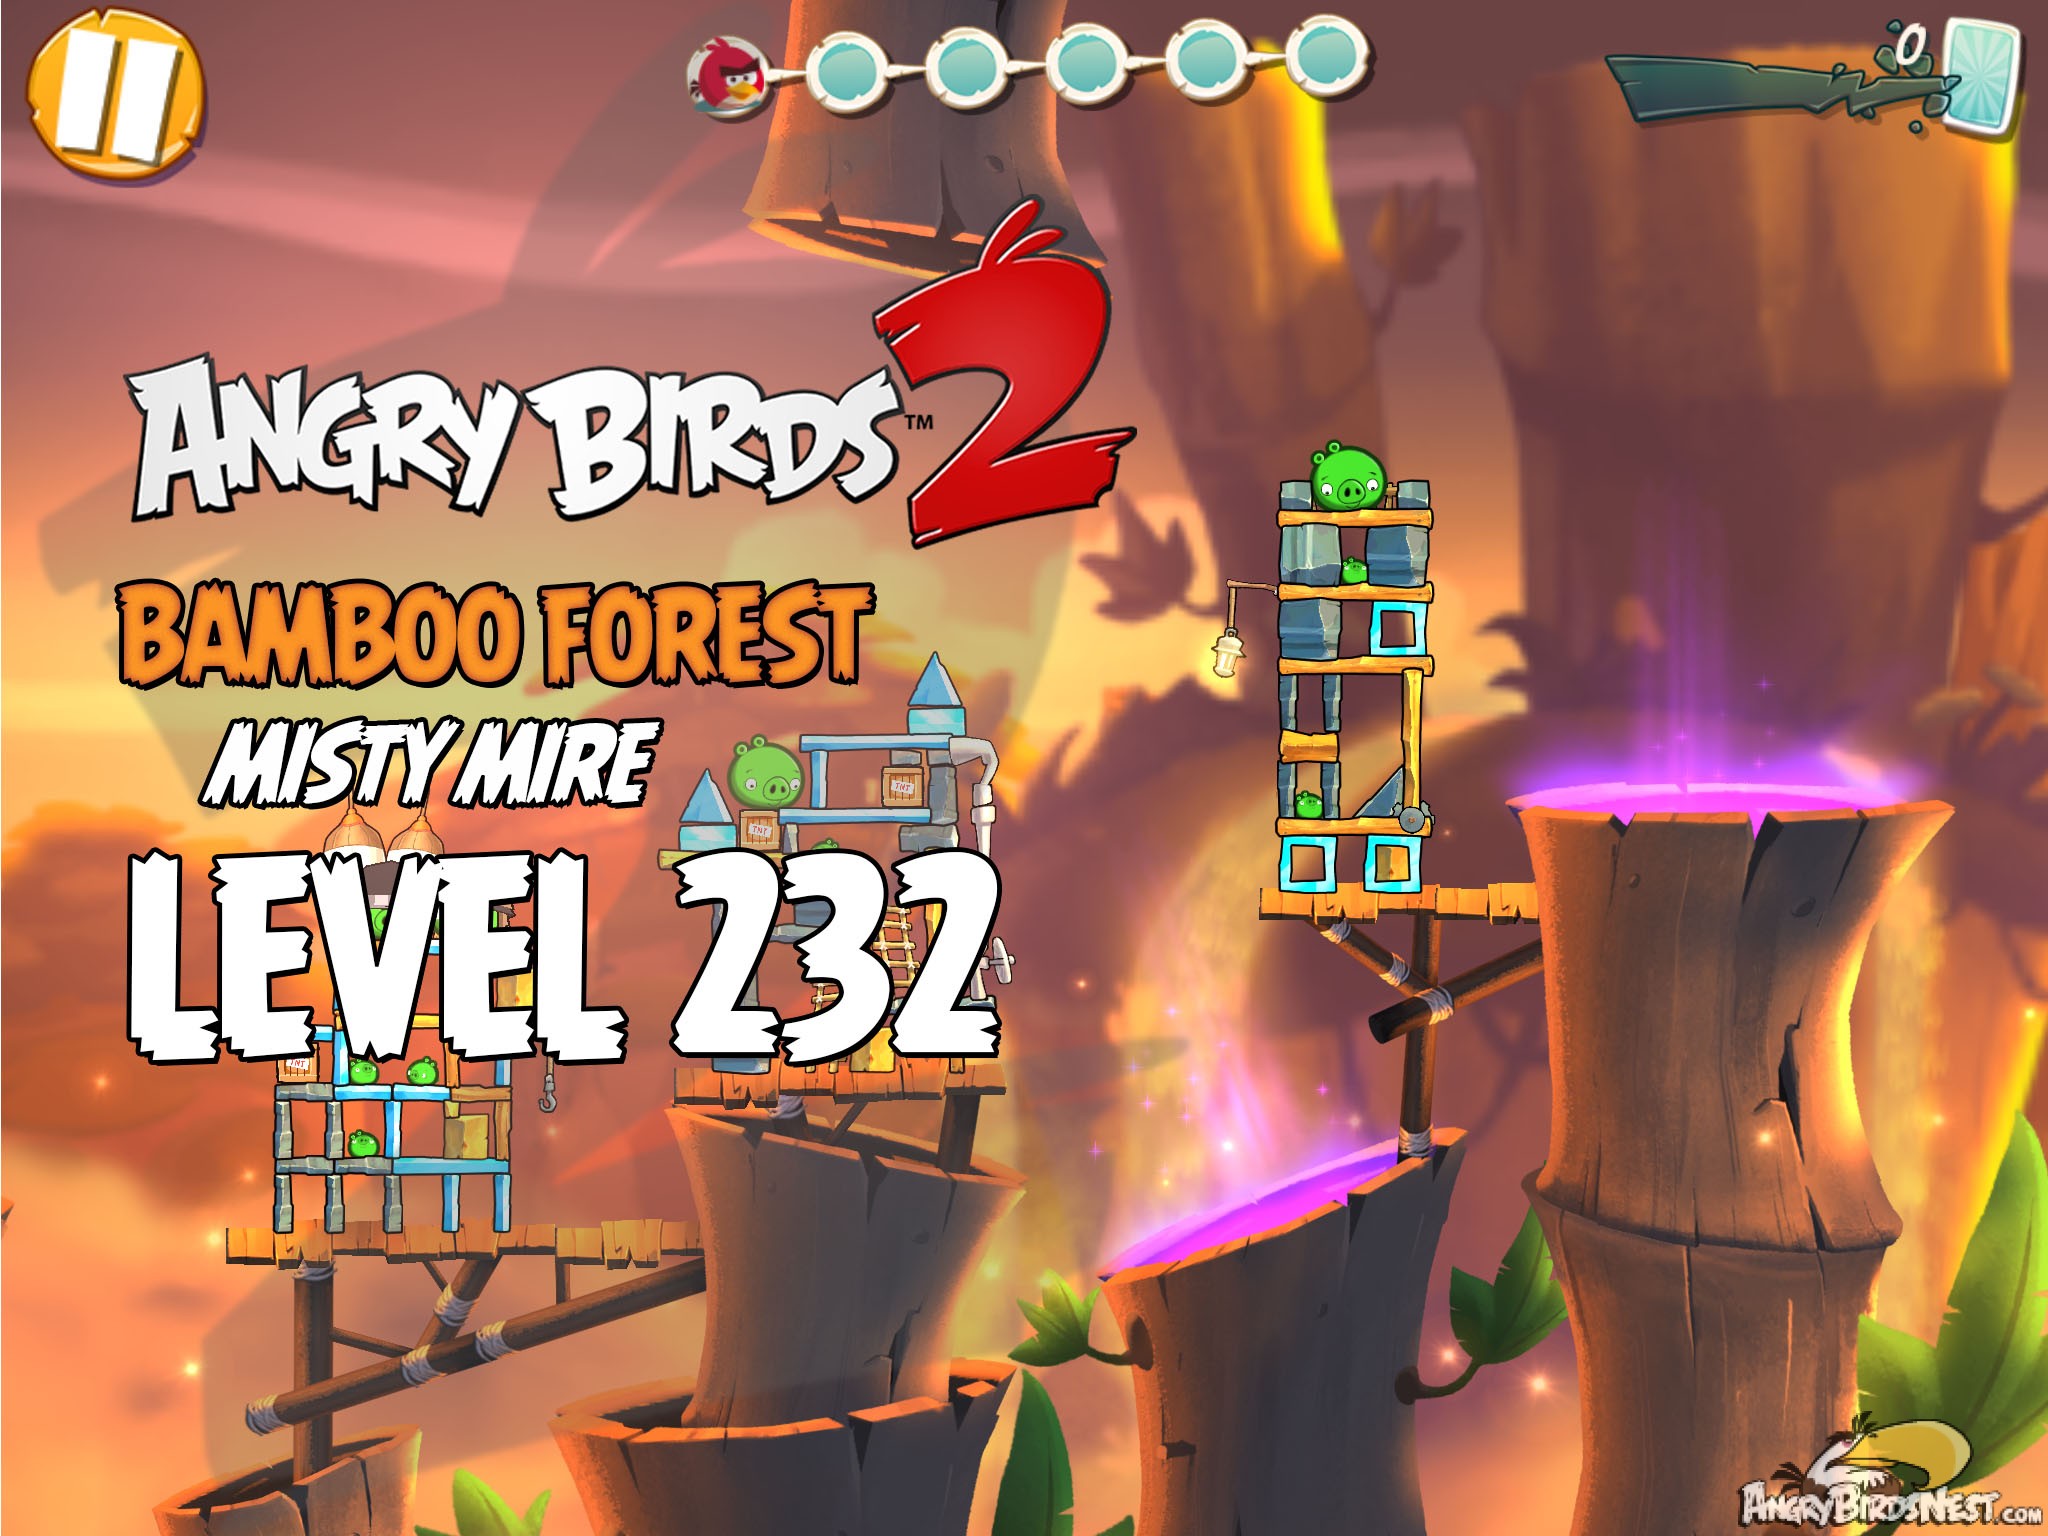 Angry Birds 2 Bamboo Forest Misty Mire Level 232